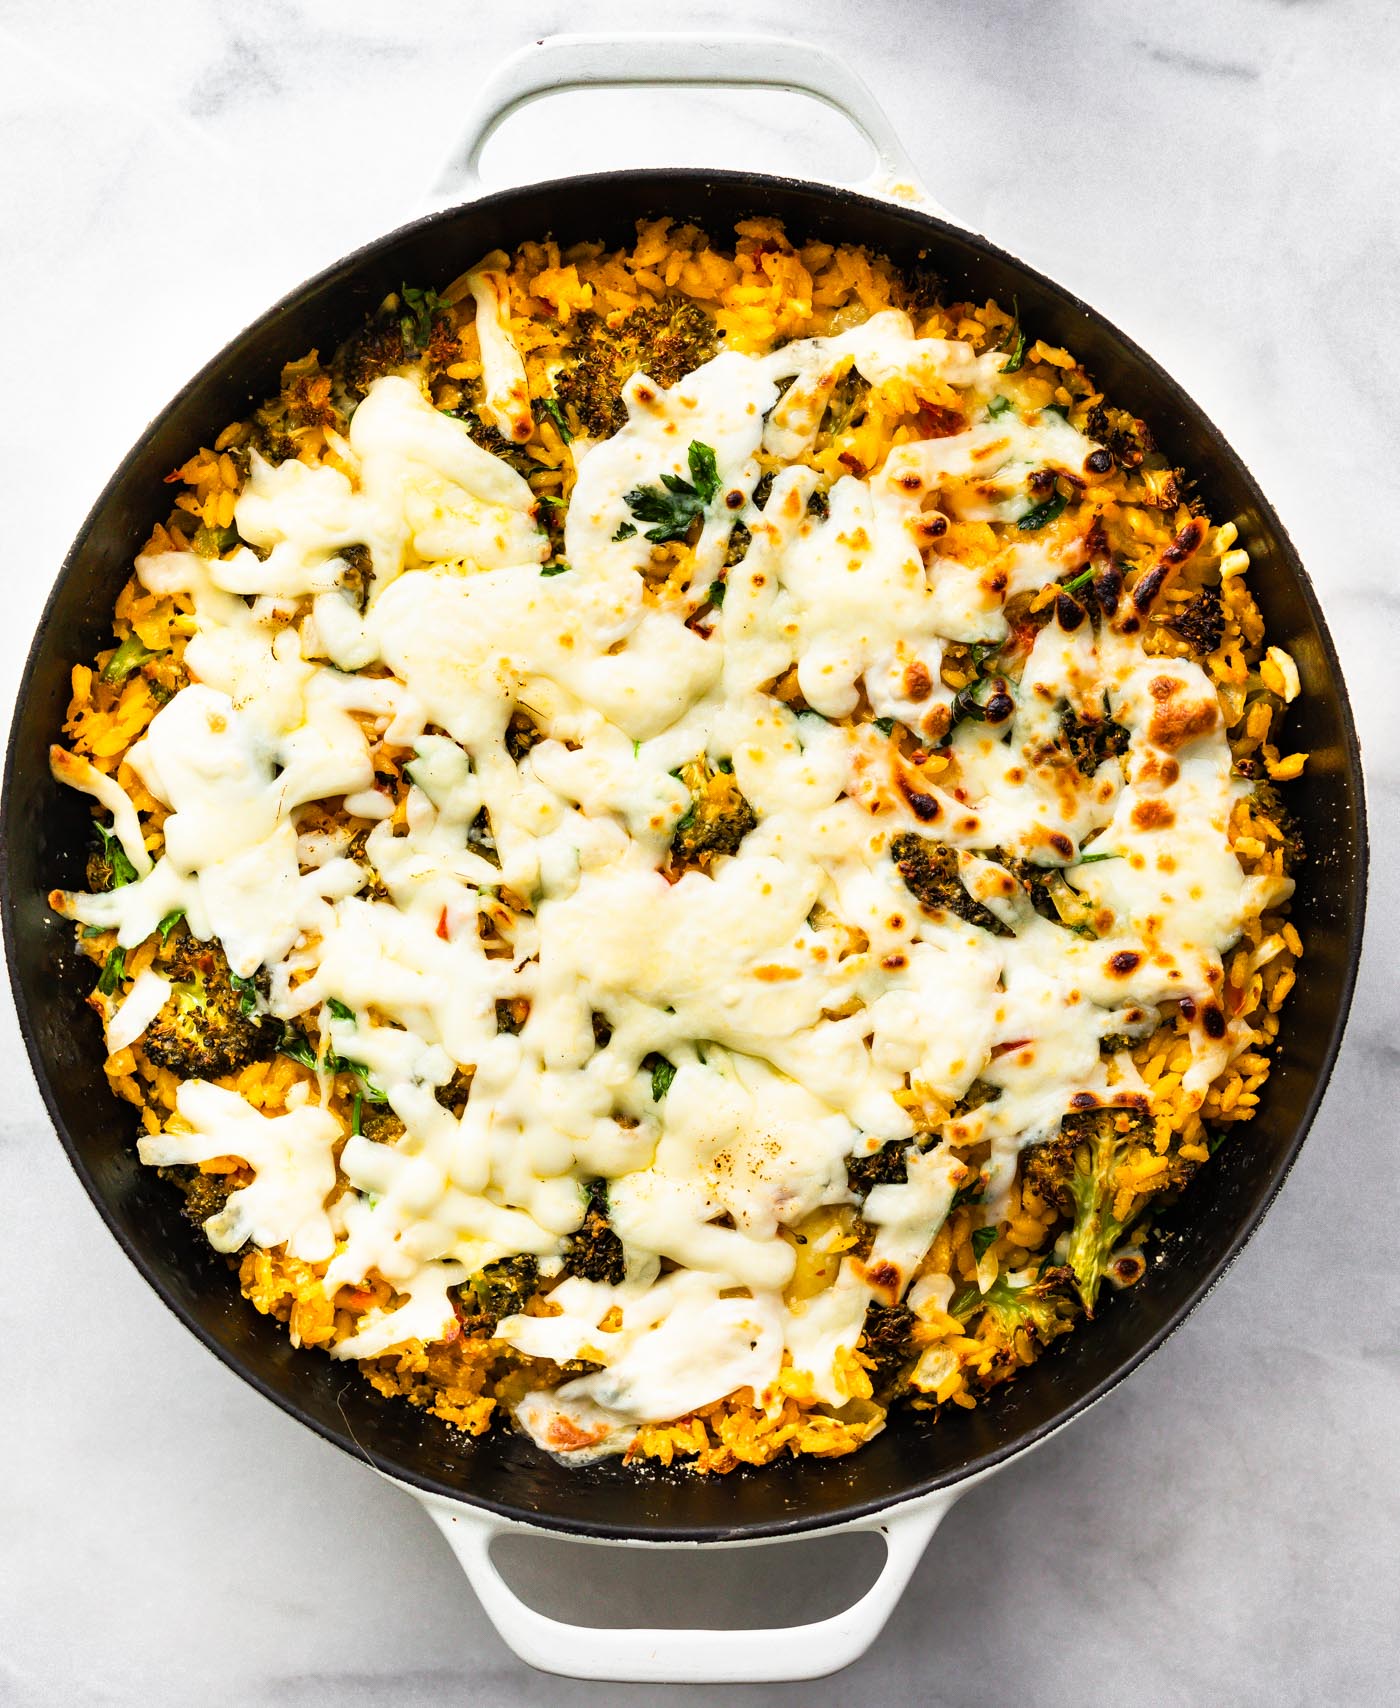 Healthy broccoli and cheese casserole topped with shredded cheese in a baking dish